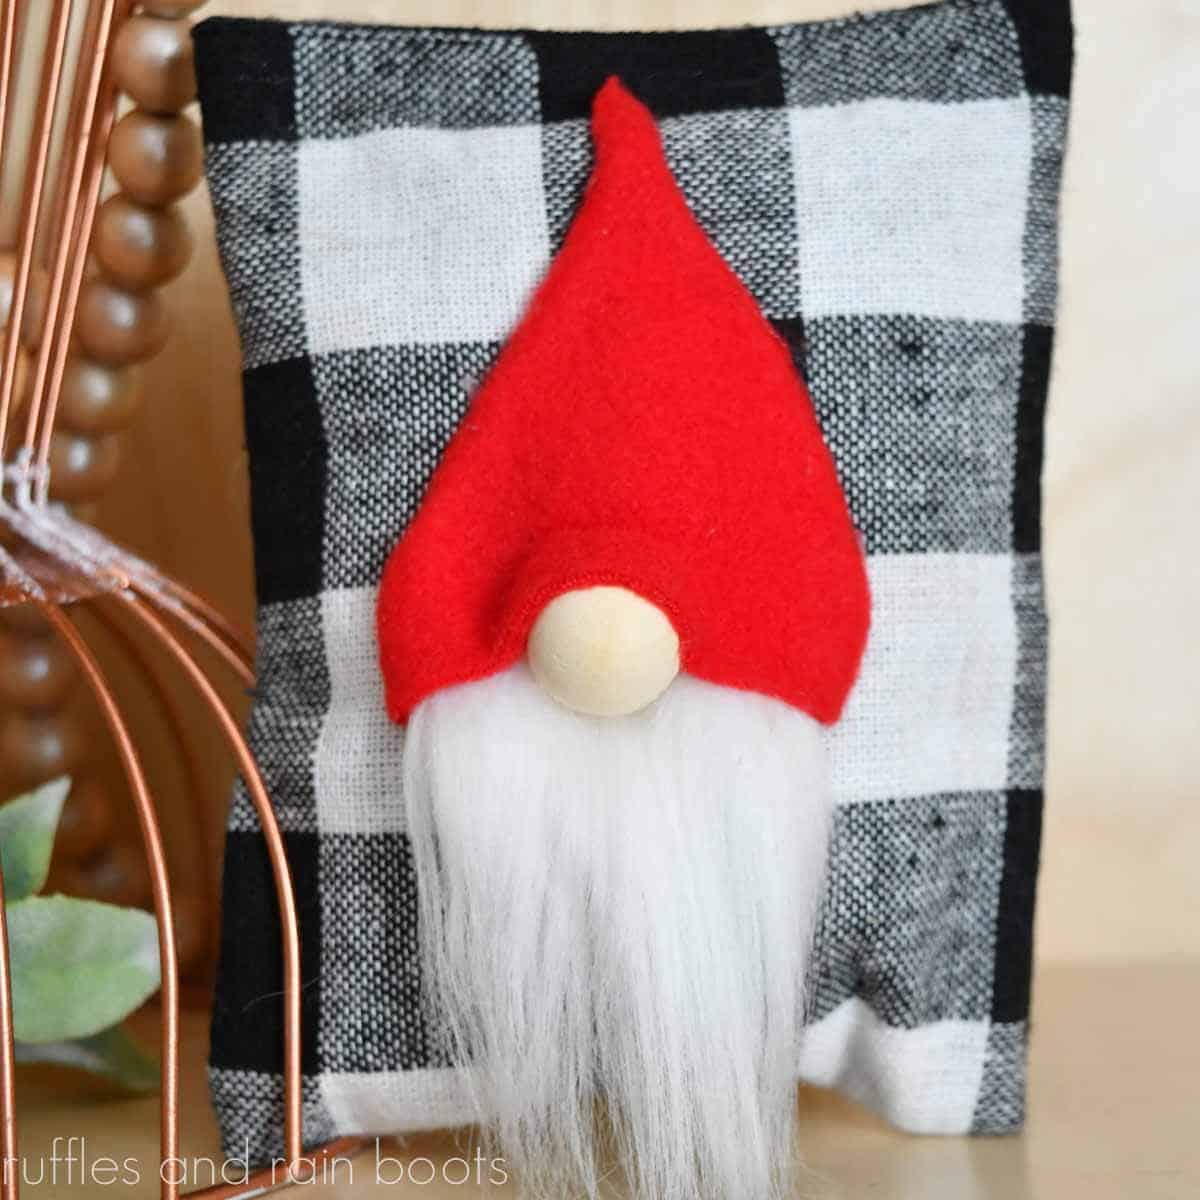 Square image of a close up red hat gnome pillow made for Christmas tiered tray decor.